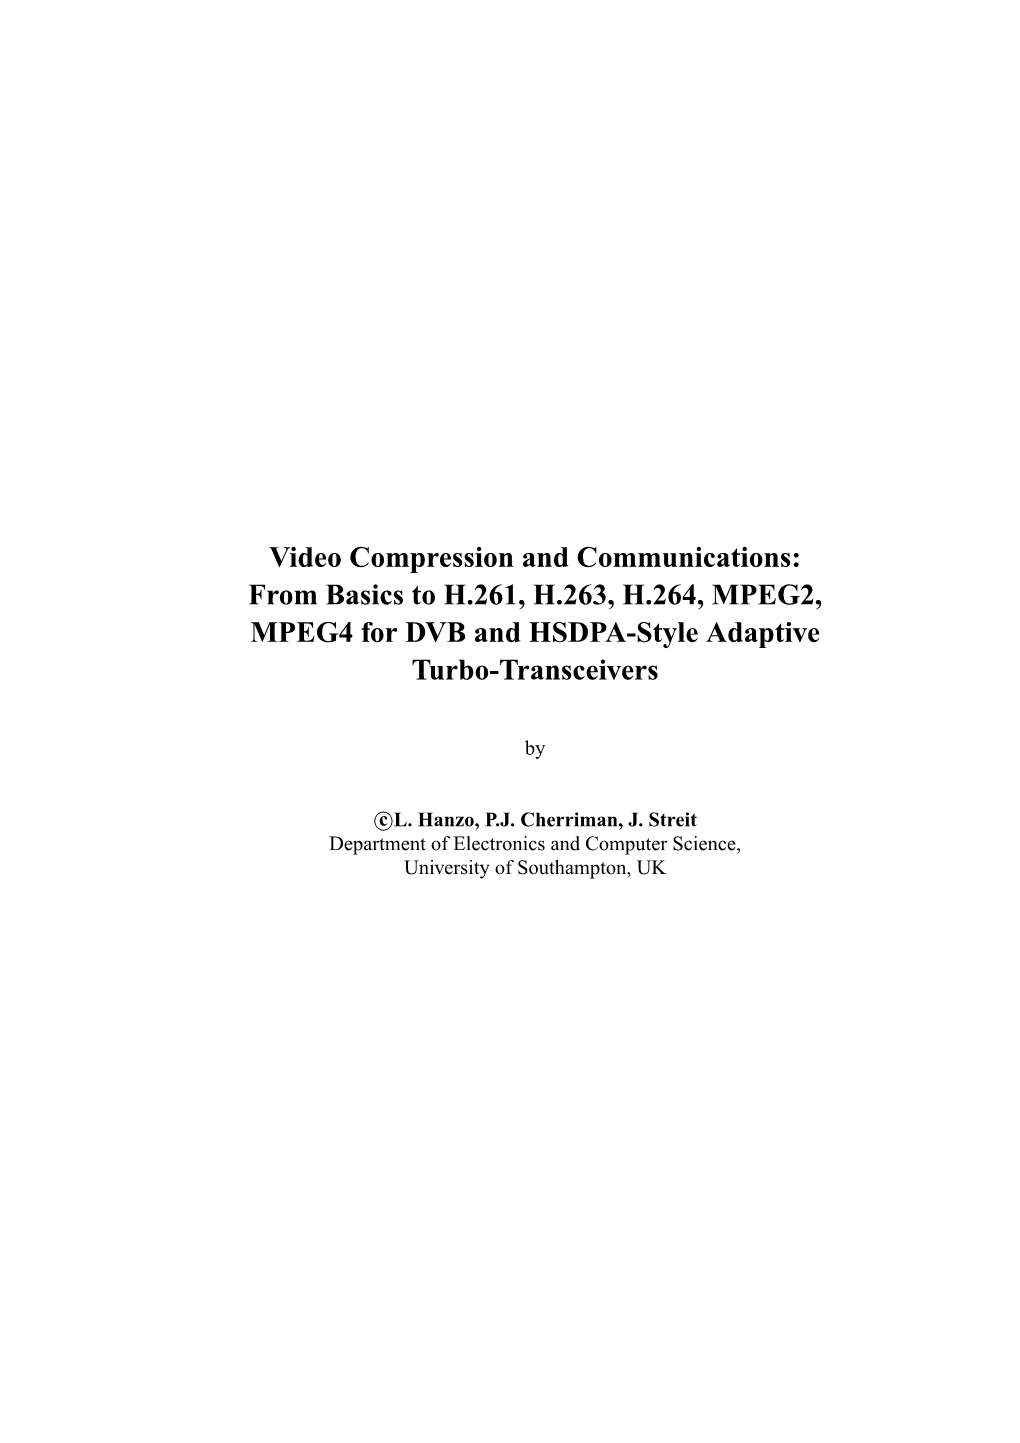 Video Compression and Communications: from Basics to H.261, H.263, H.264, MPEG2, MPEG4 for DVB and HSDPA-Style Adaptive Turbo-Transceivers